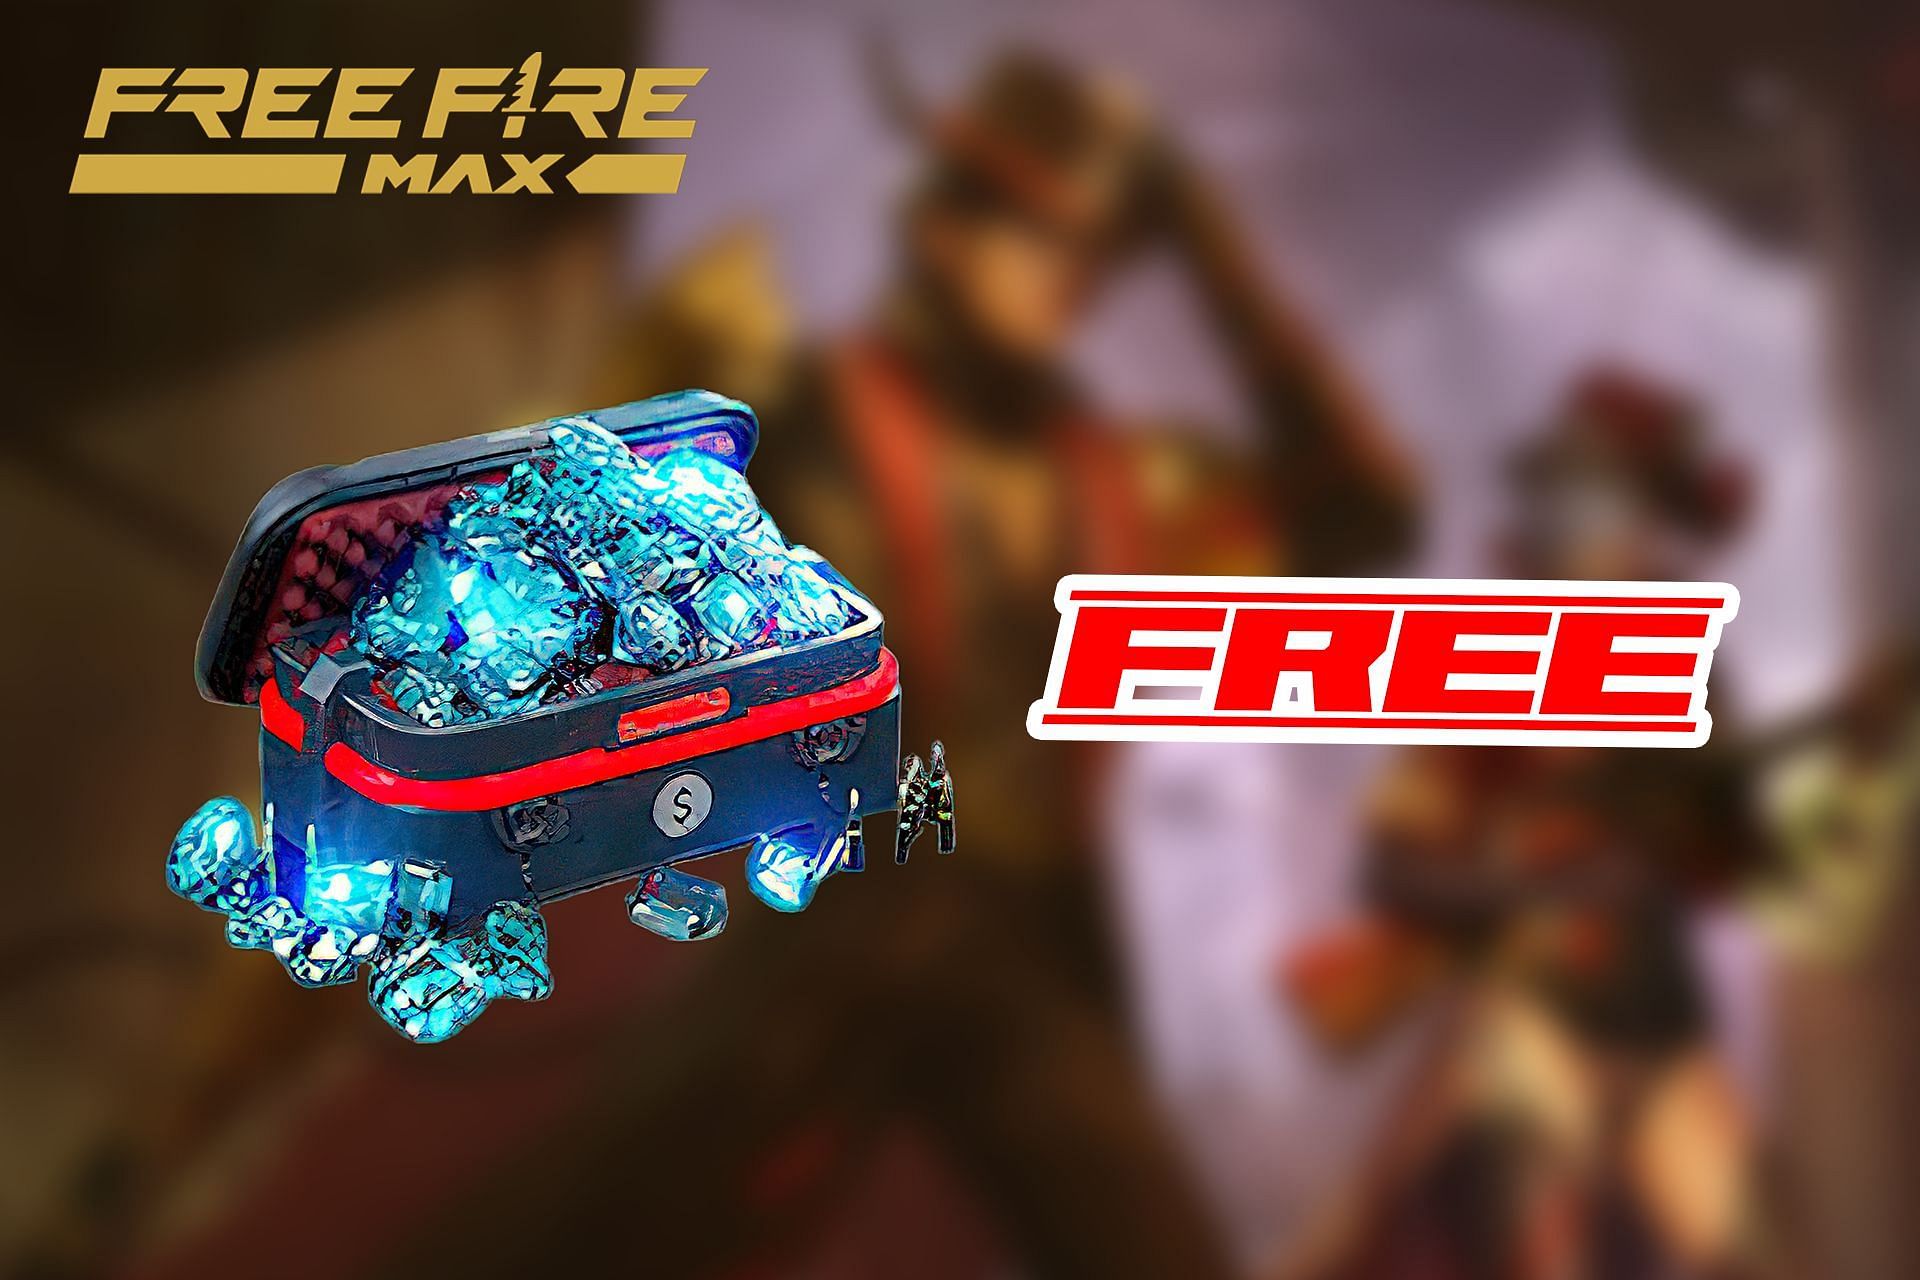 3 best sources to get free diamonds in Free Fire MAX (September 2022)